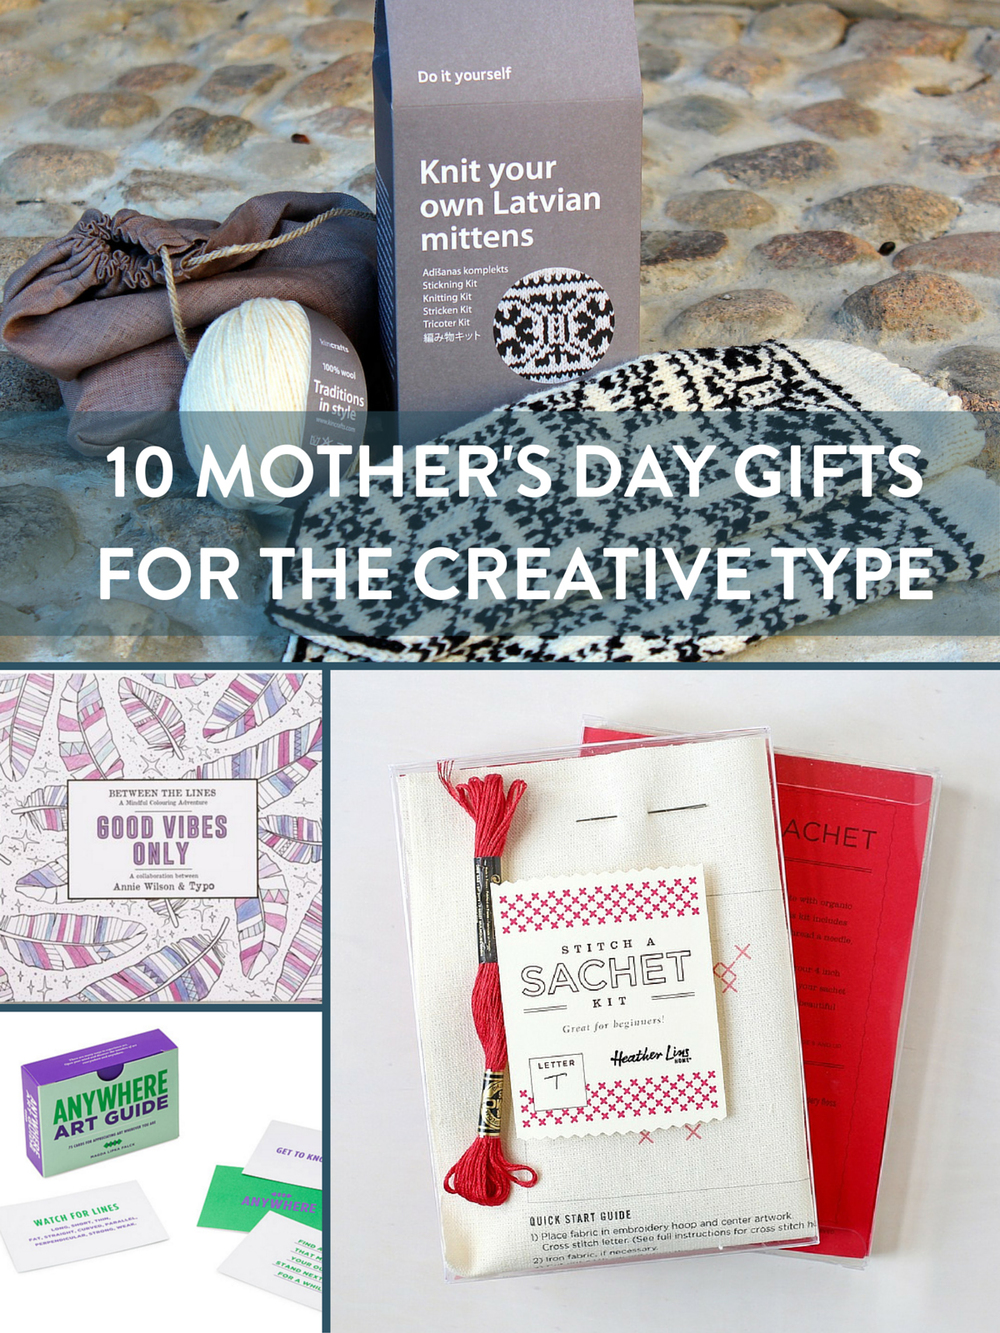 Shopping Guide: 10 Mother's Day Gifts For The Creative Type